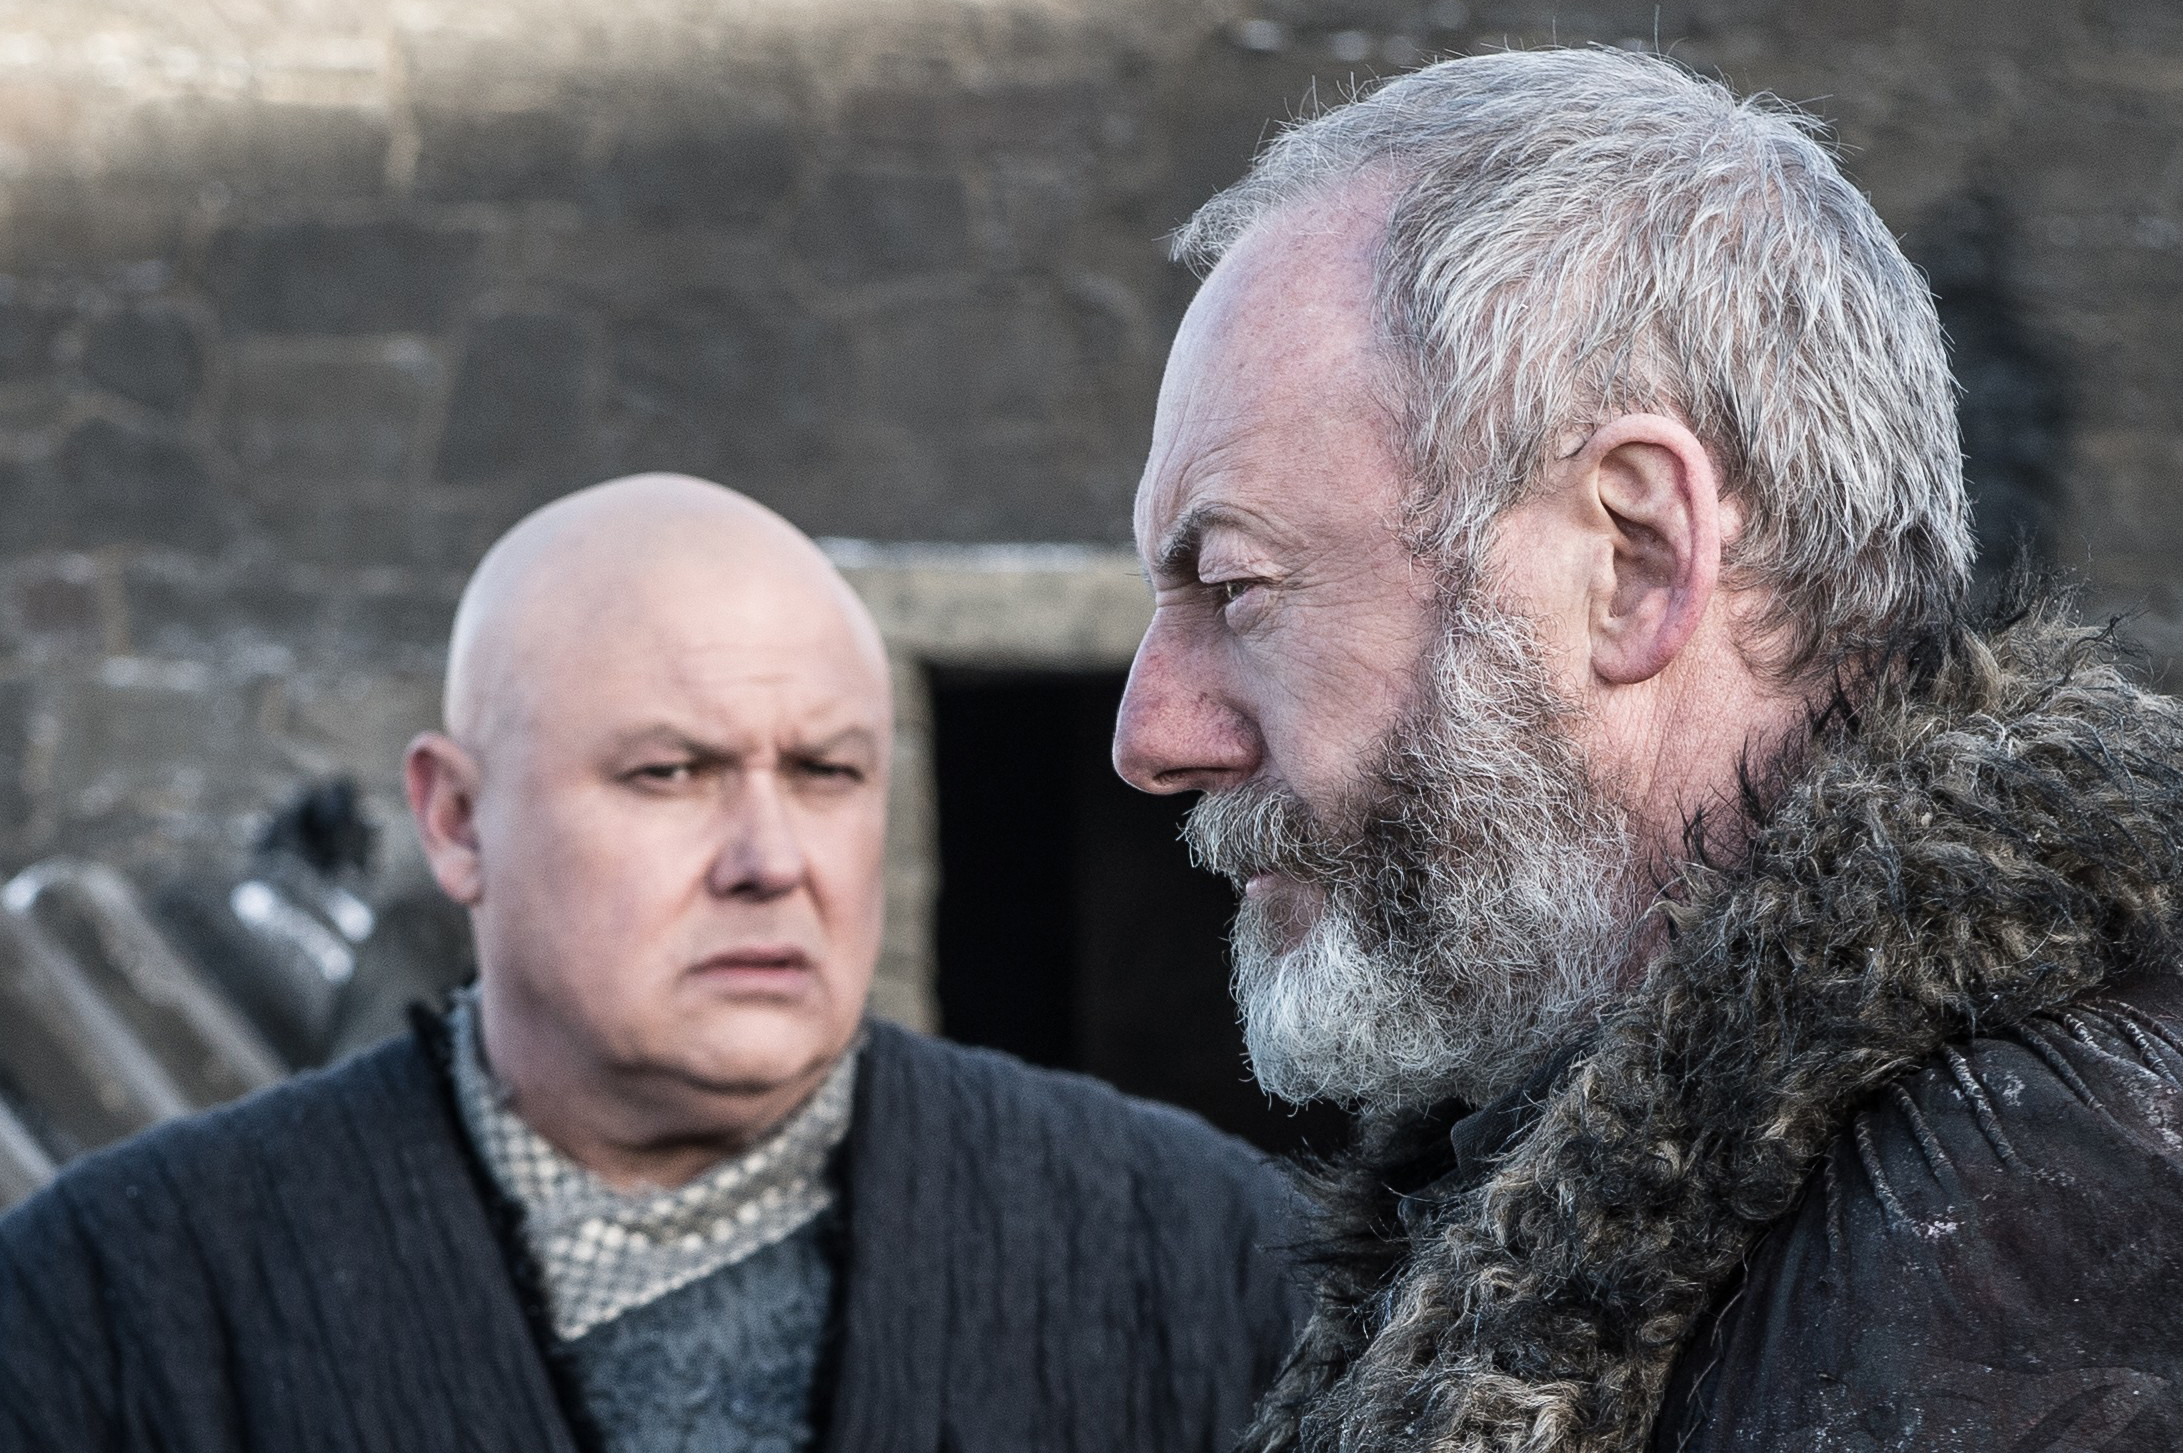 Conleth Hill Davos Seaworth Game Of Thrones Liam Cunningham Lord Varys 2183x1453